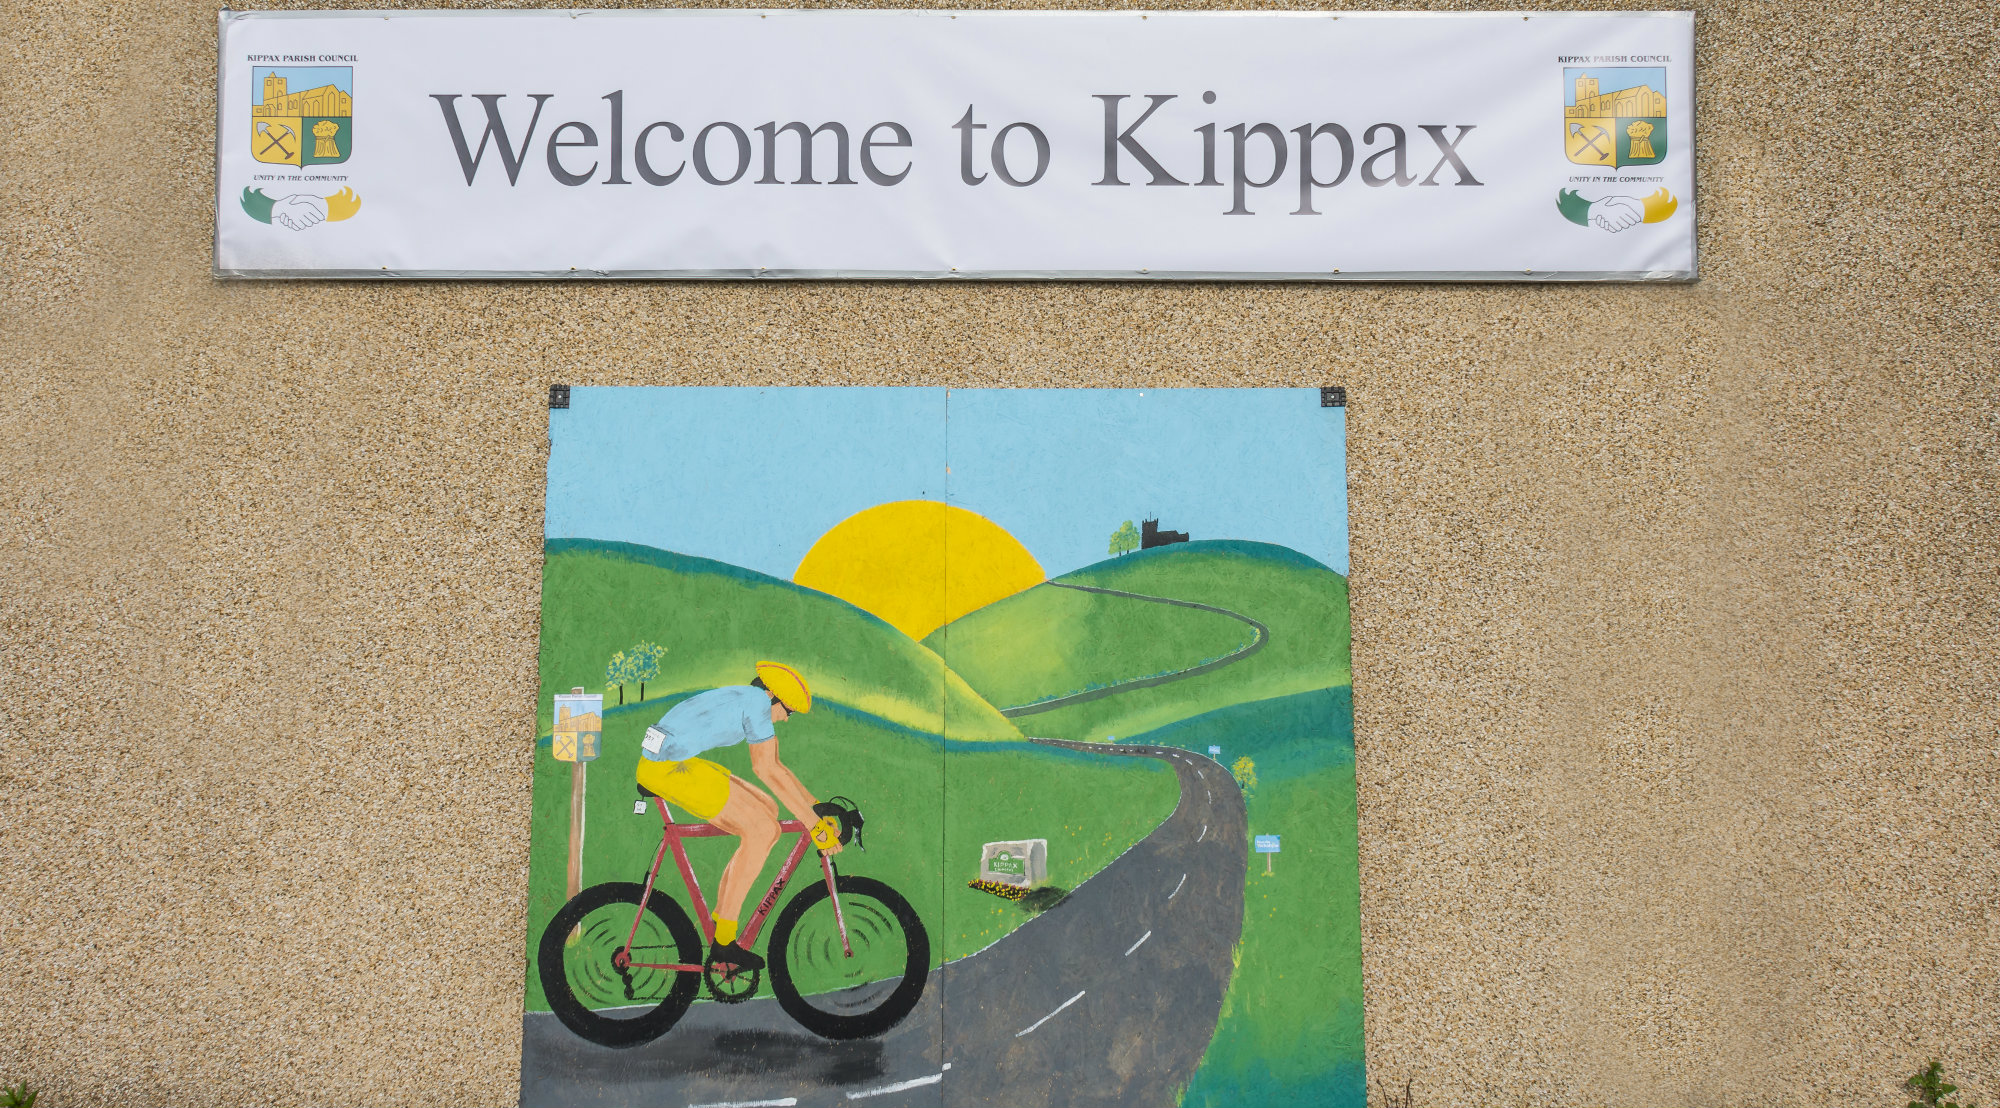 Welcome to kippax noticeboard and painting of cyclist